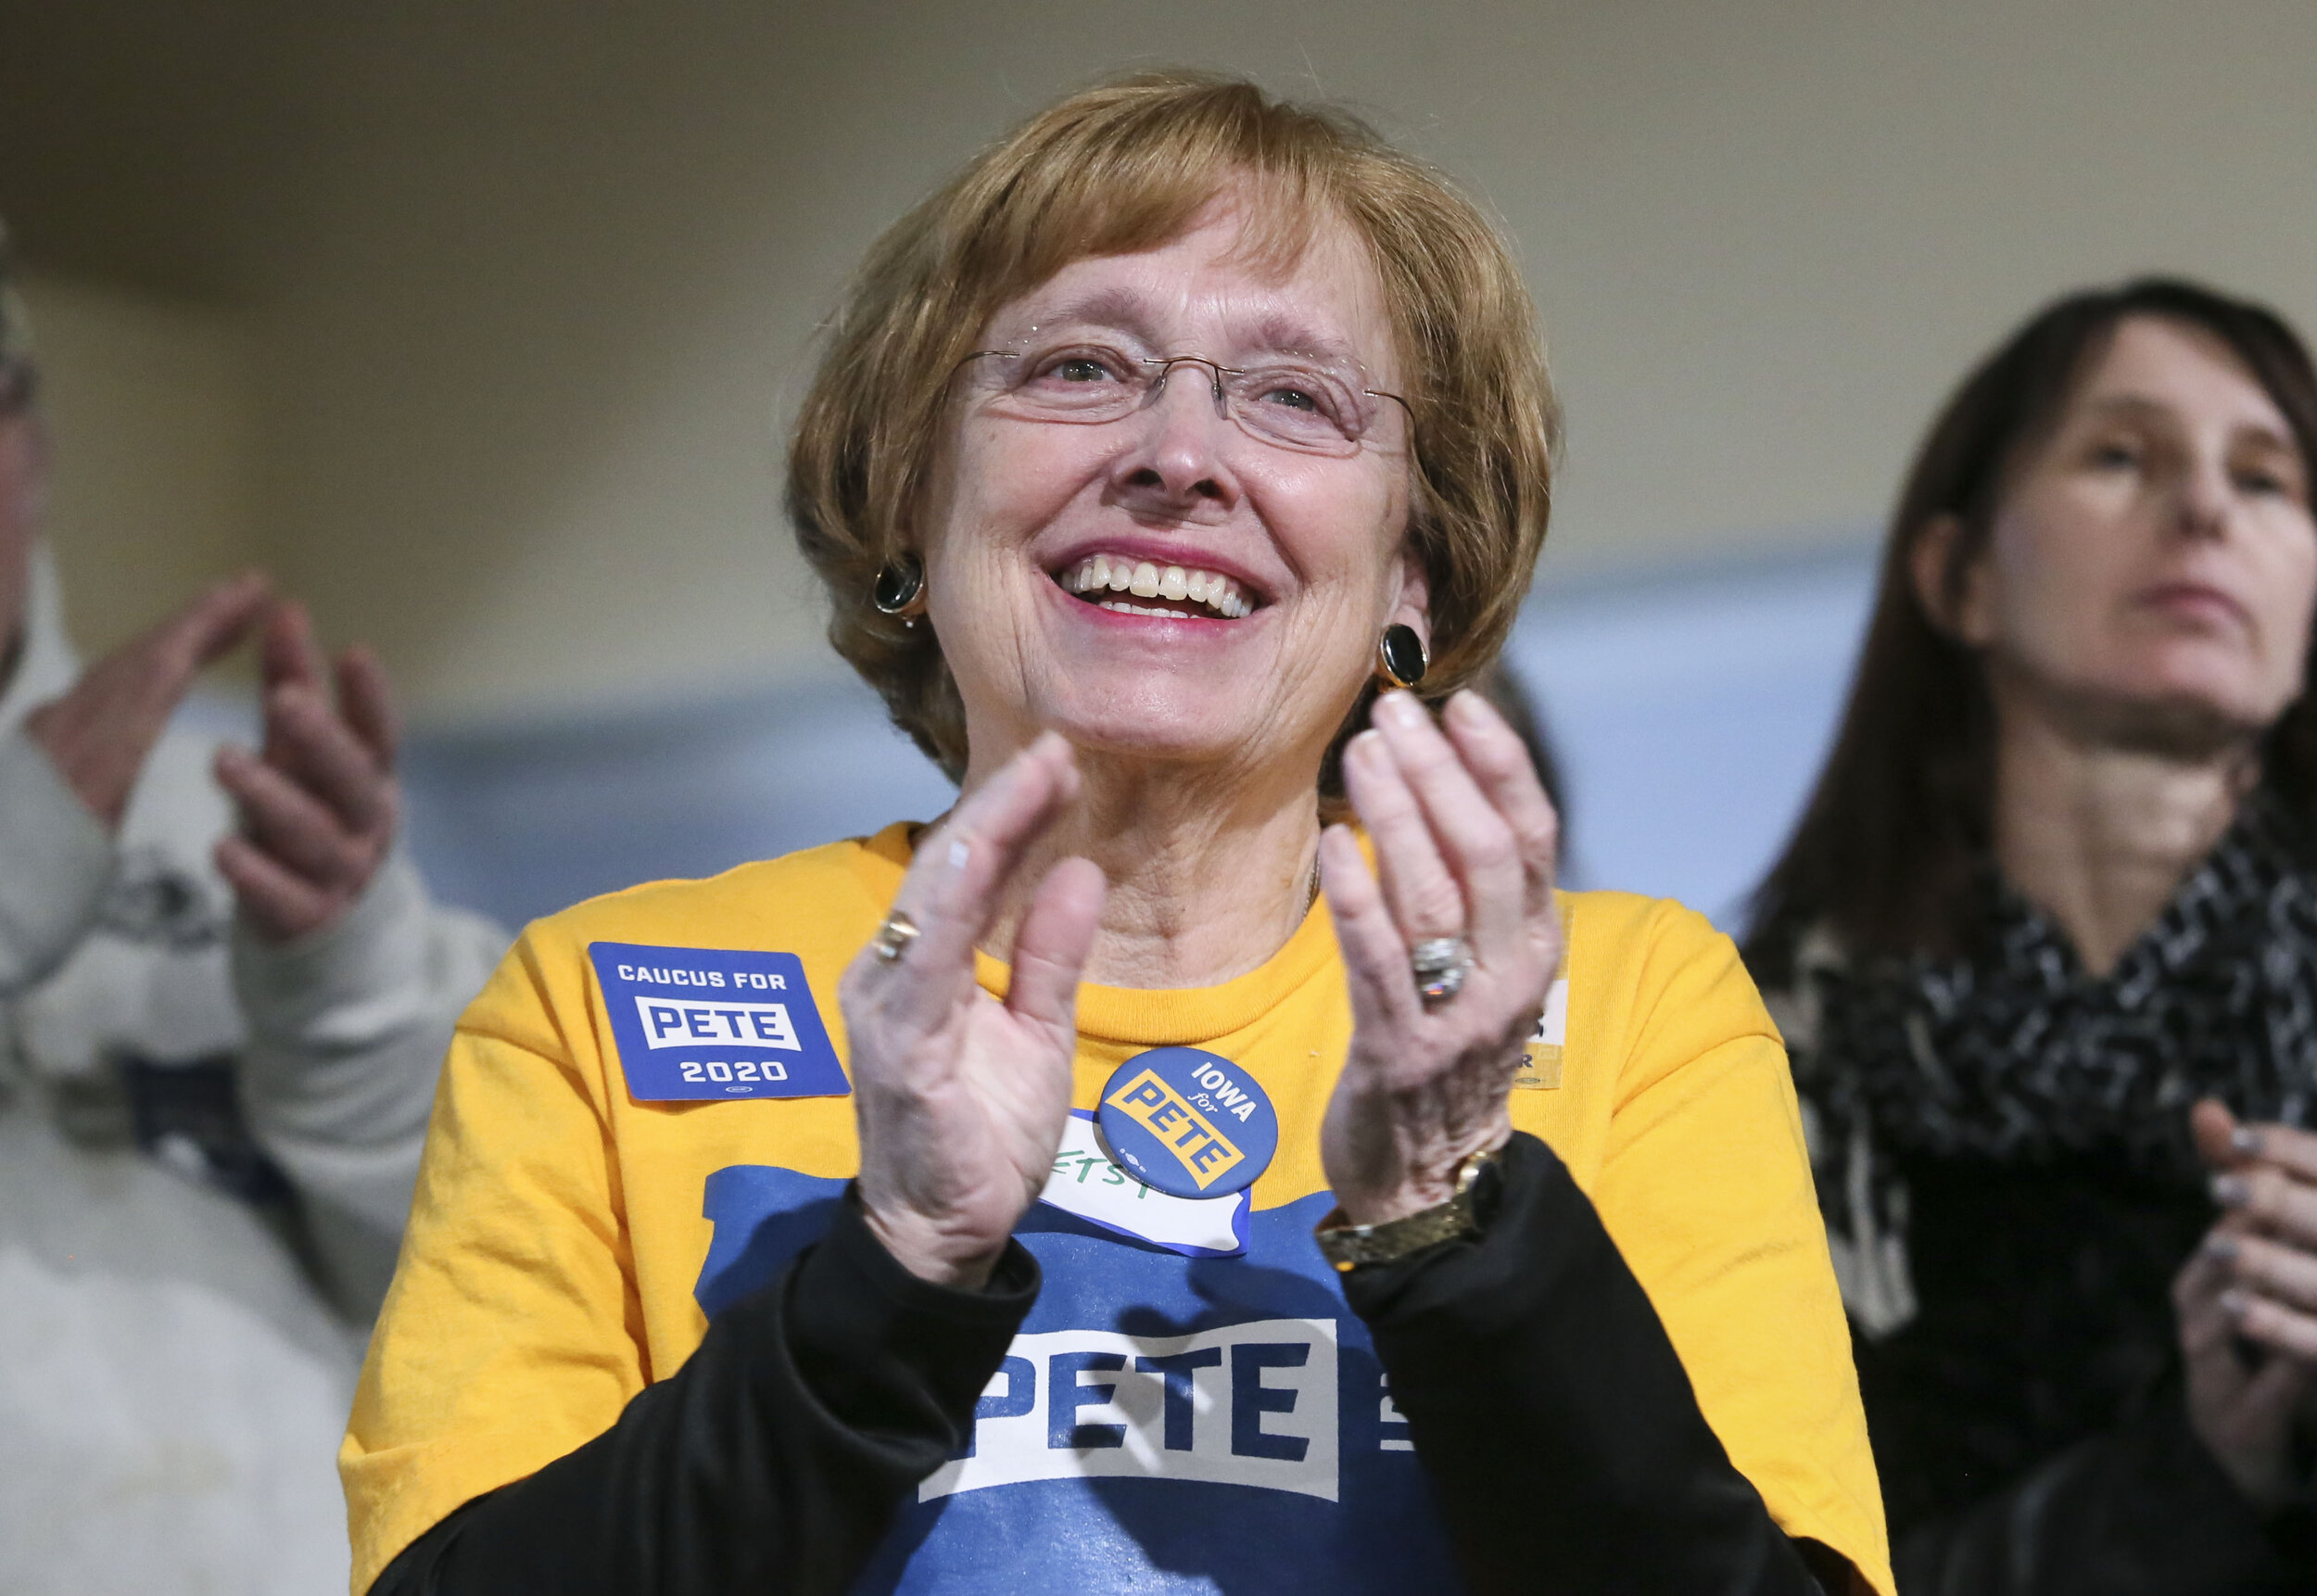  Betsy Fair of Wilton claps for Democratic presidential candidate Pete Buttigieg, and former mayor of South Bend, Indiana as he speaks to supporters in Muscatine at River's Edge Event Loft, Tuesday, Jan. 21, 2020.  